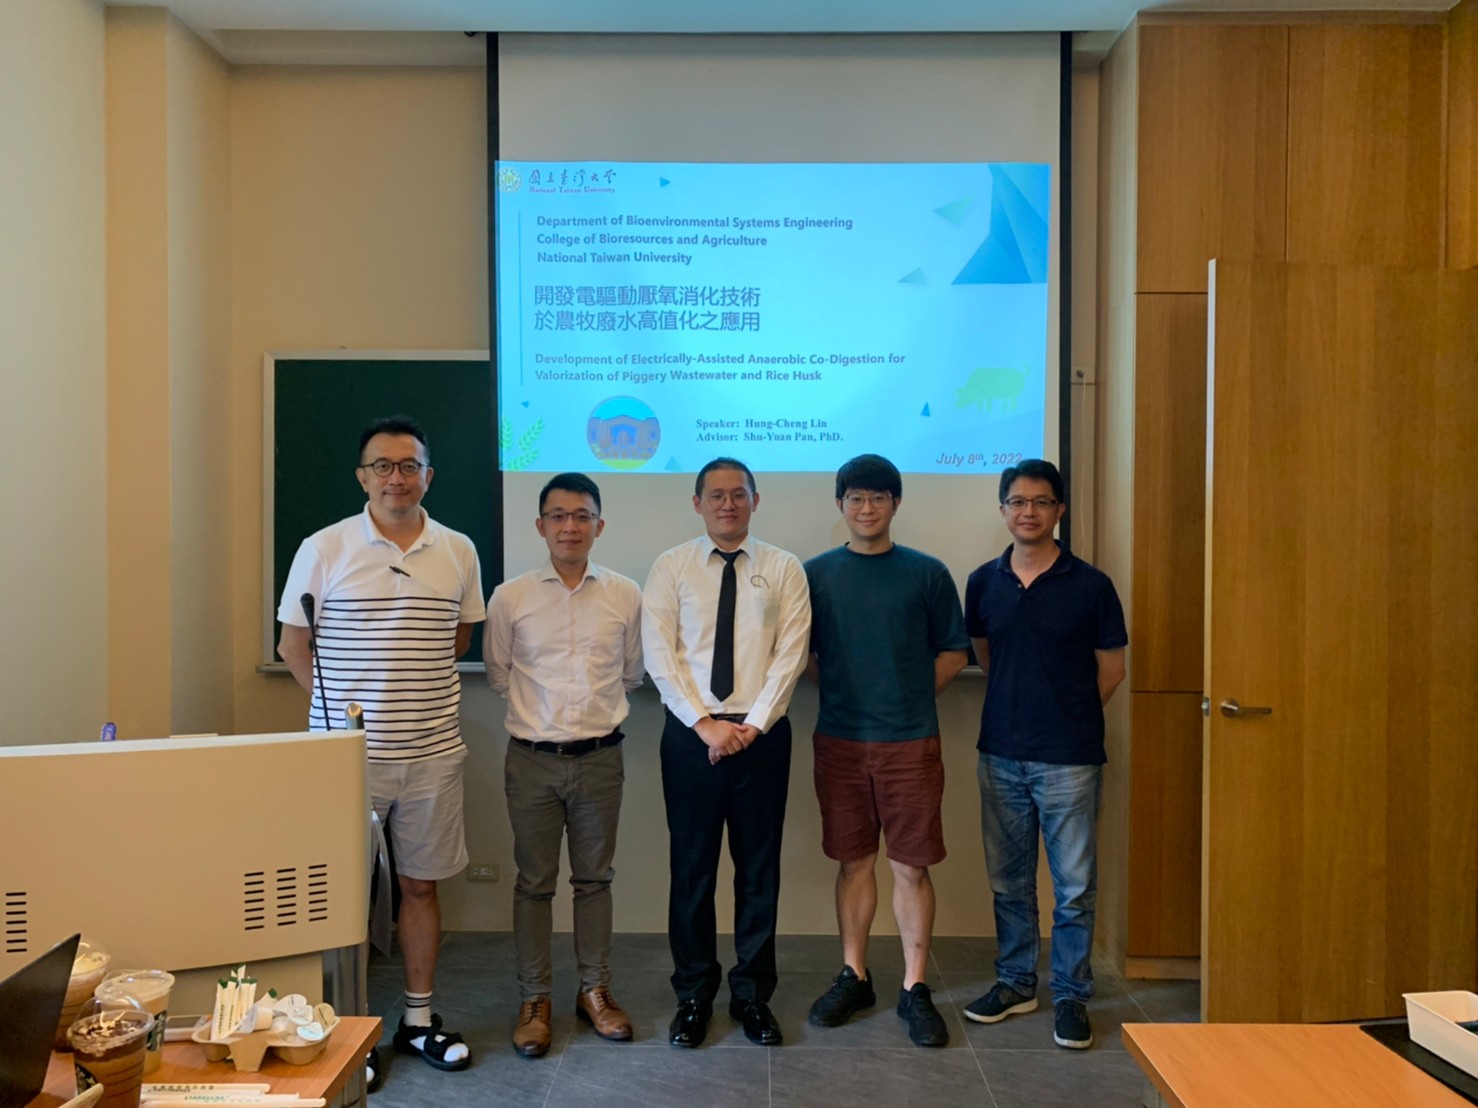 Hung-Cheng completed the oral defense for his master thesis!!